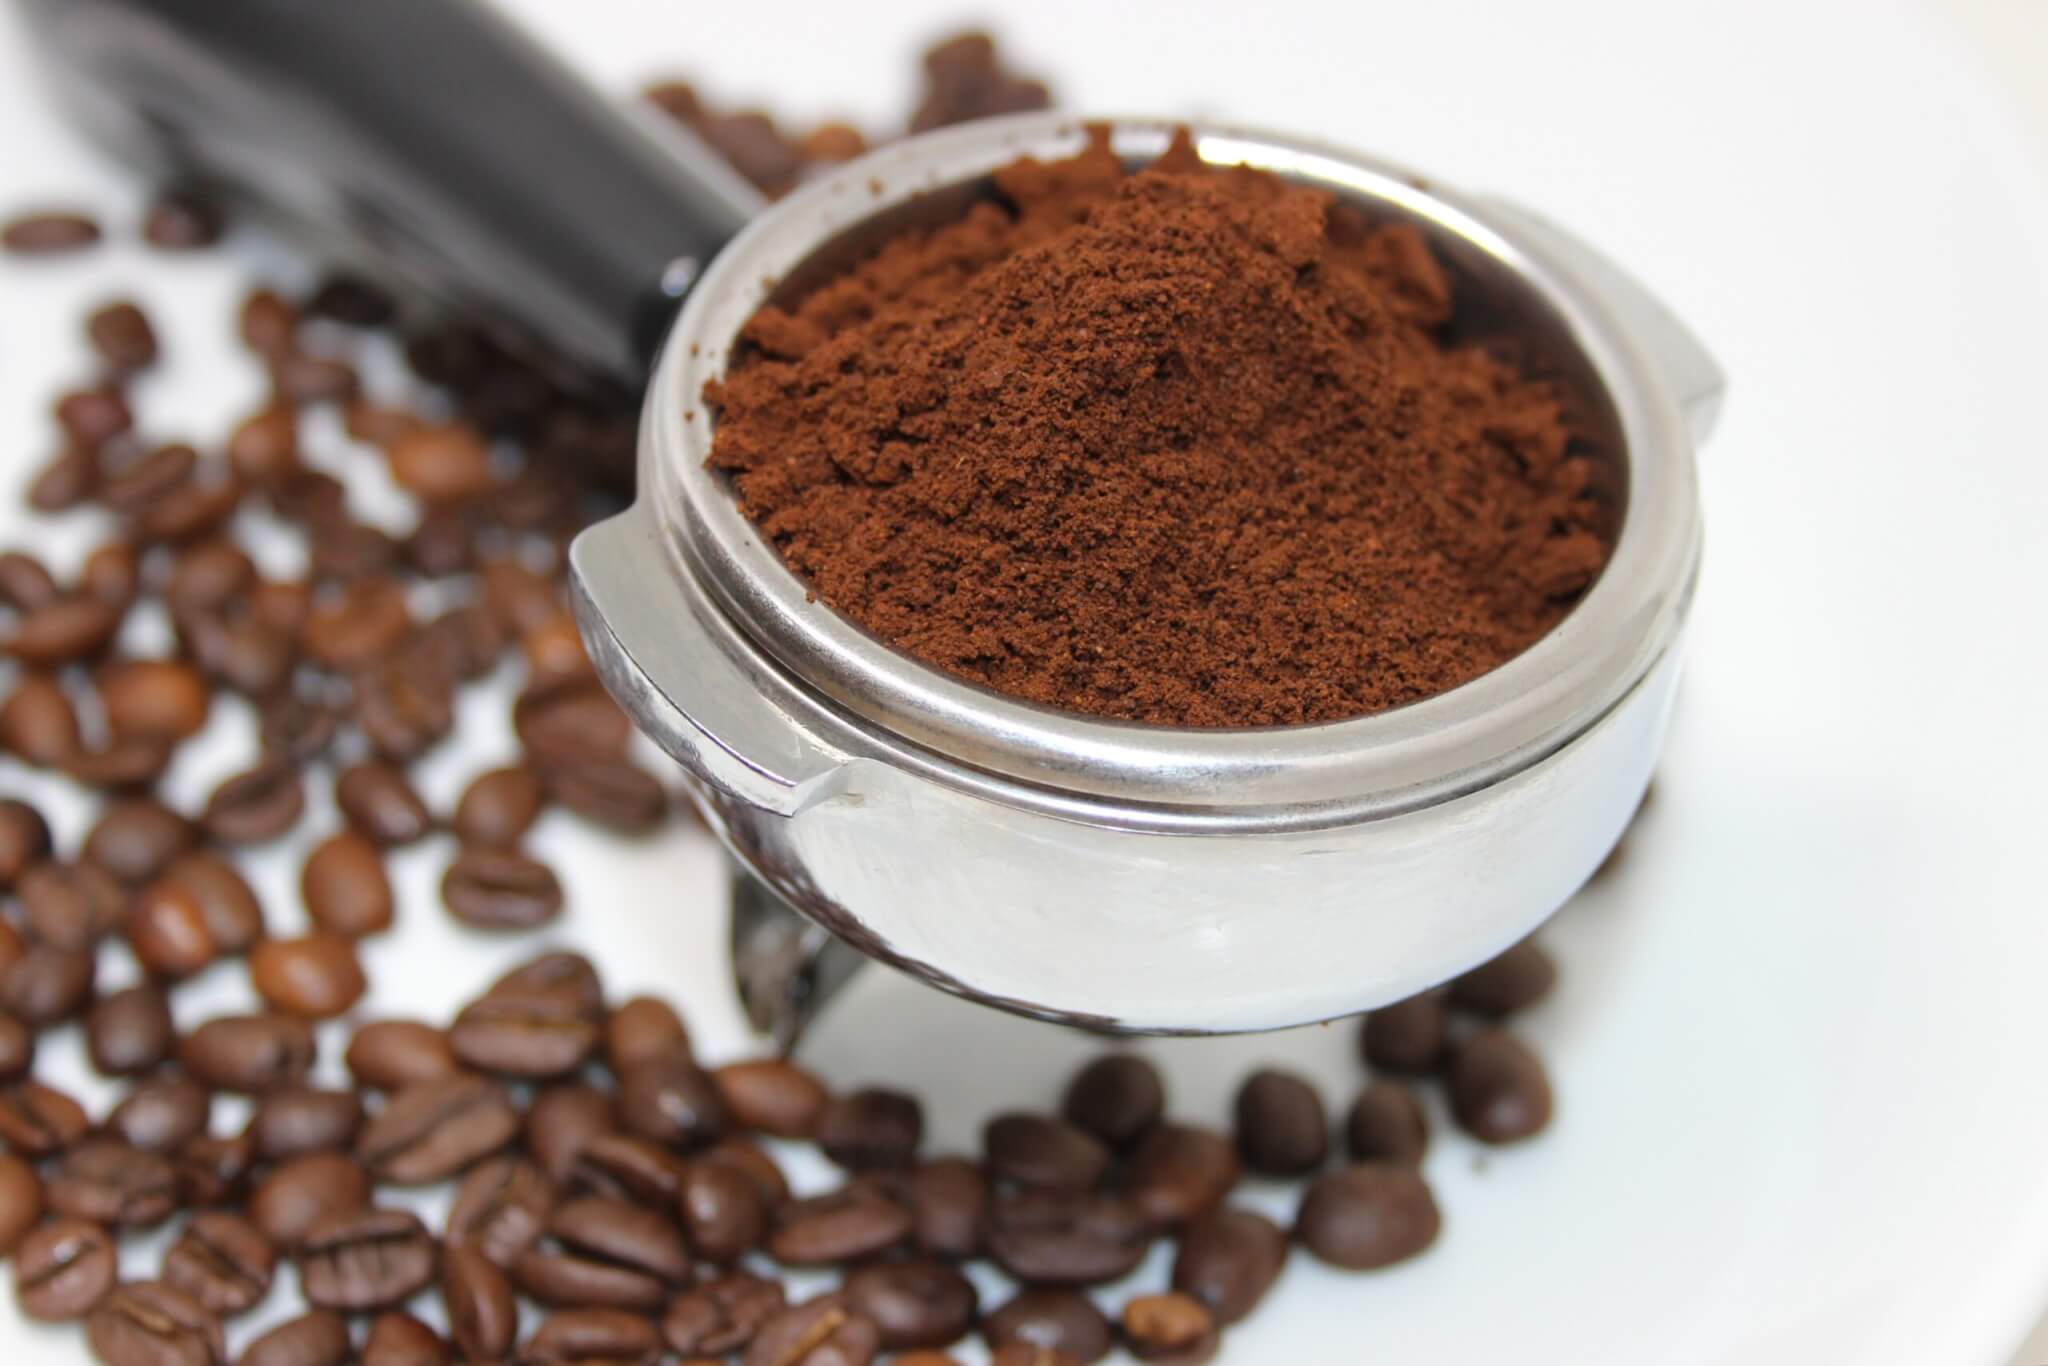 Scoop of coffee grounds and beans